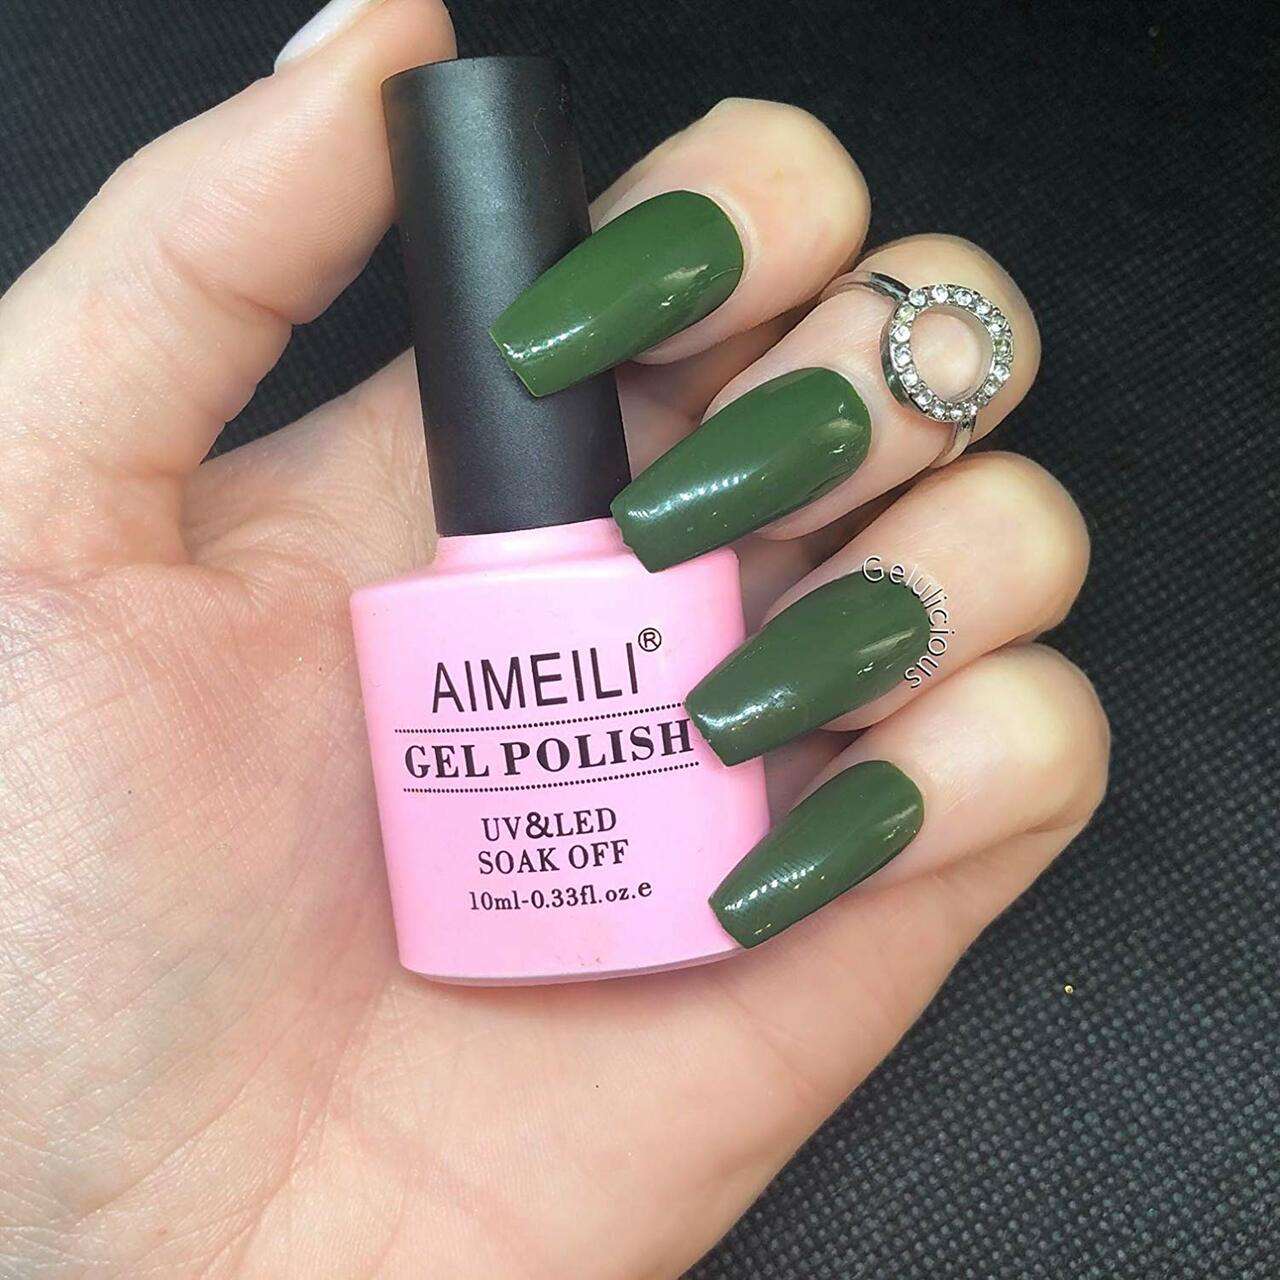 olive green nails